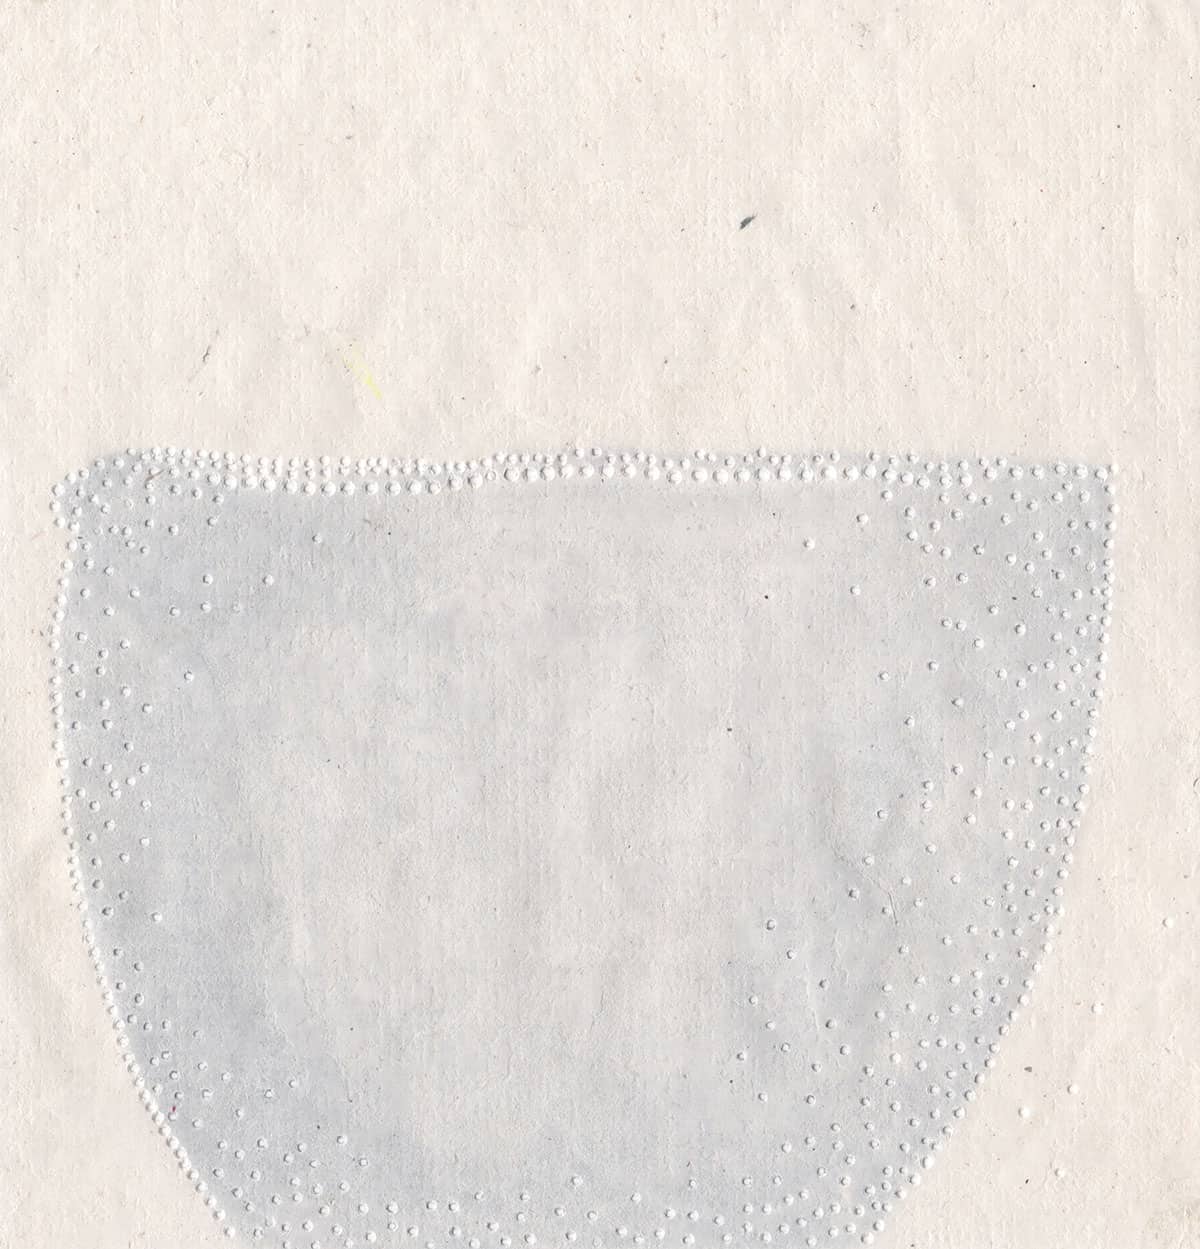 drawing of blue shape with embossed dotted outline